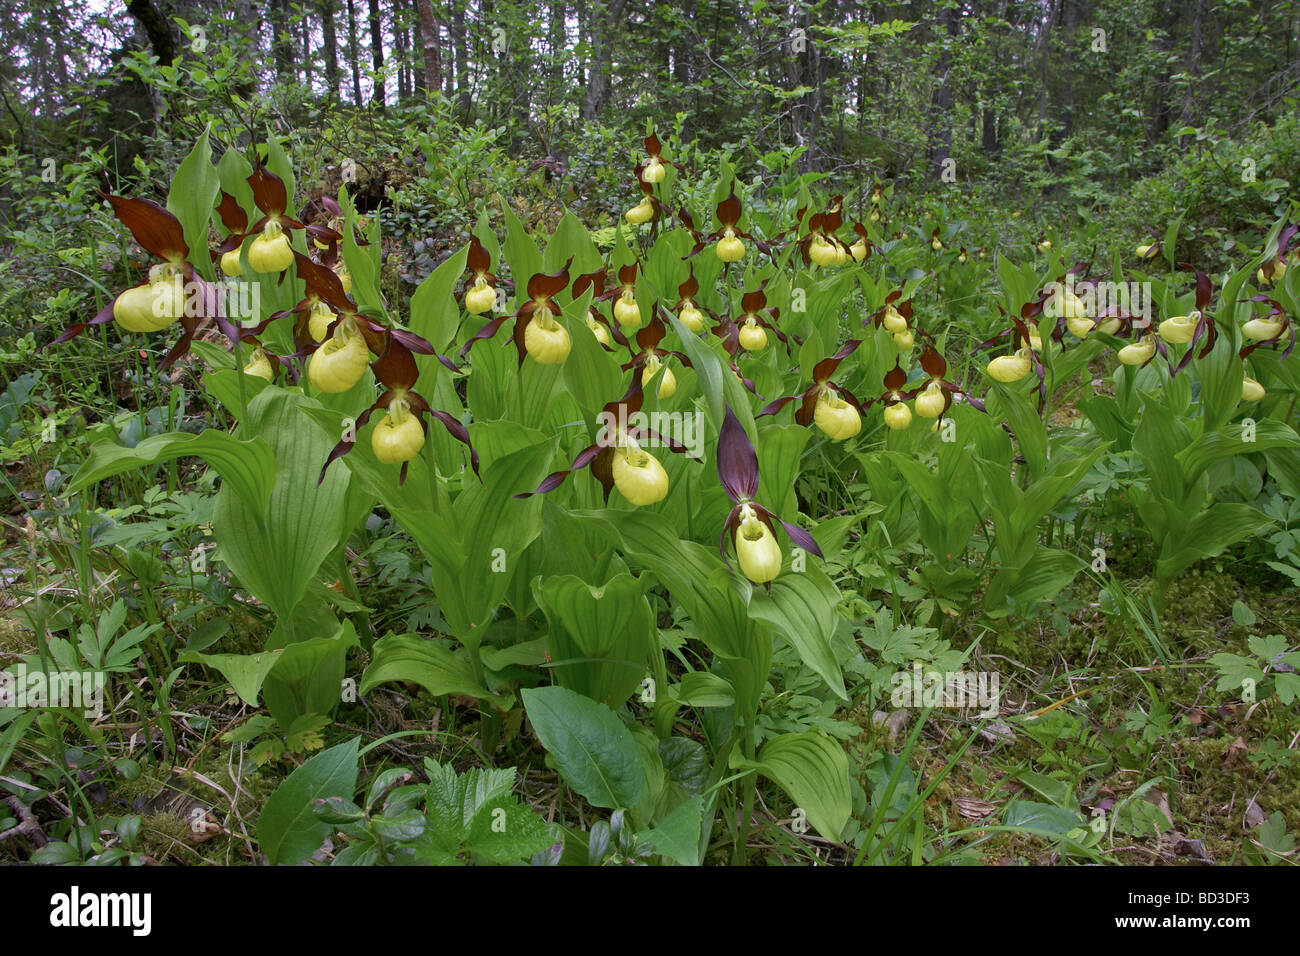 Ladys Slipper Orchid (Cypripedium calceolus), flowering stand in woodland Stock Photo